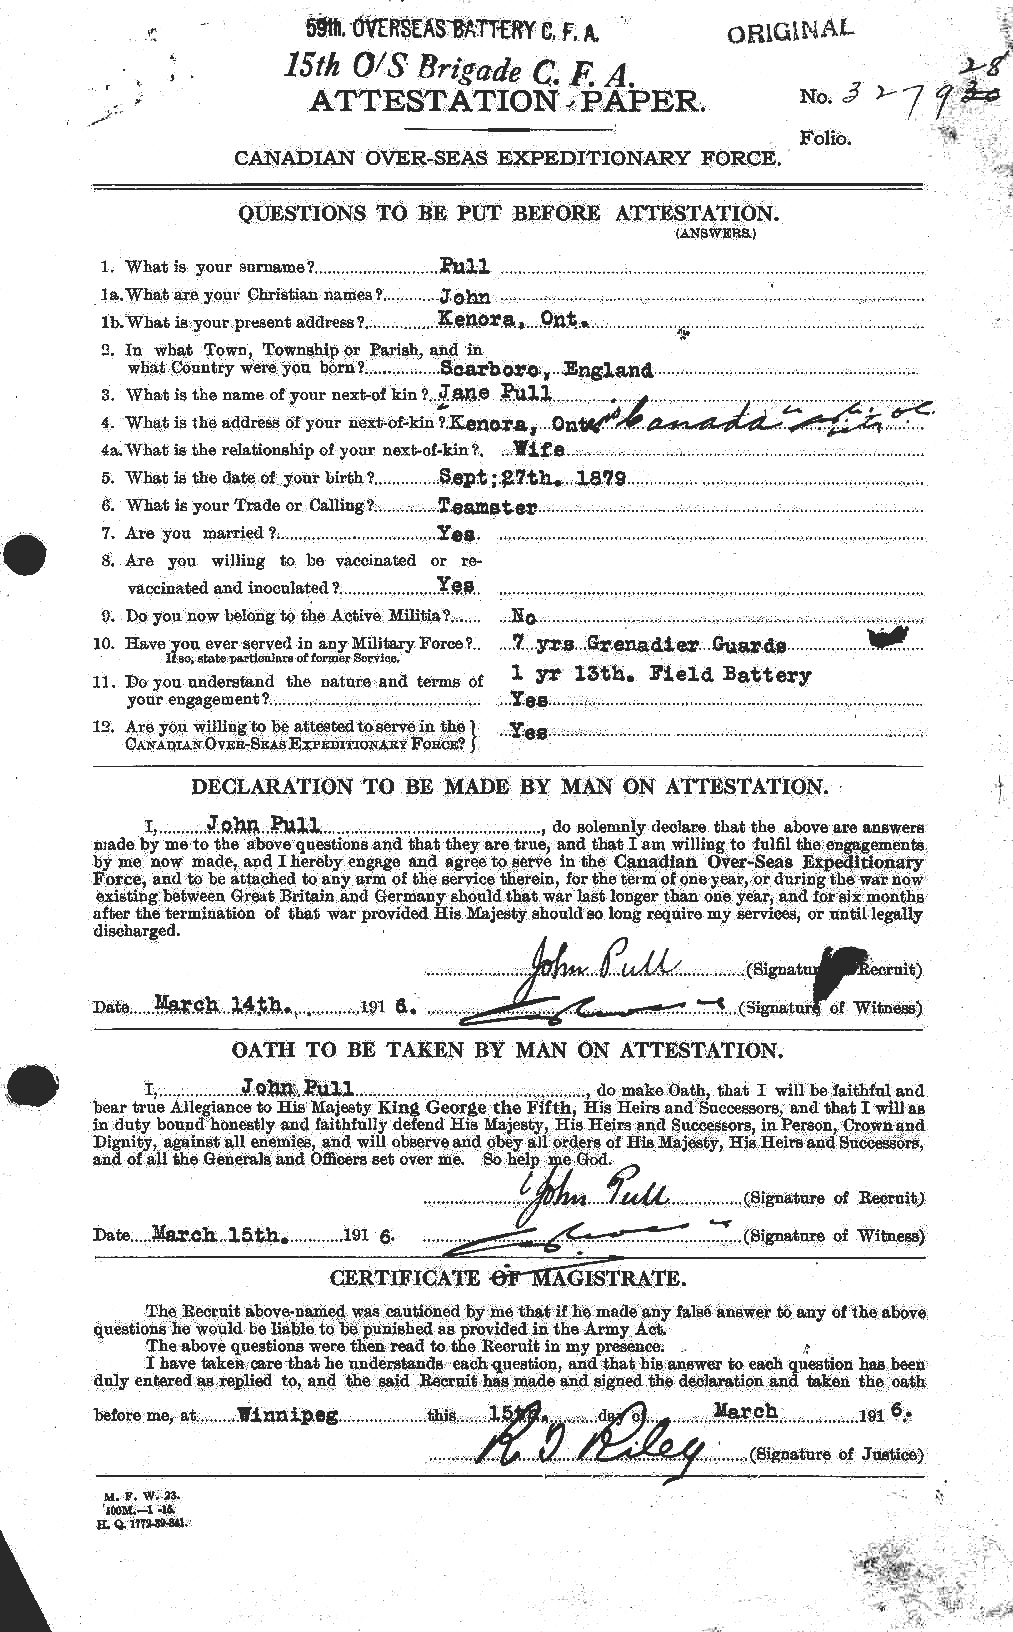 Personnel Records of the First World War - CEF 589537a